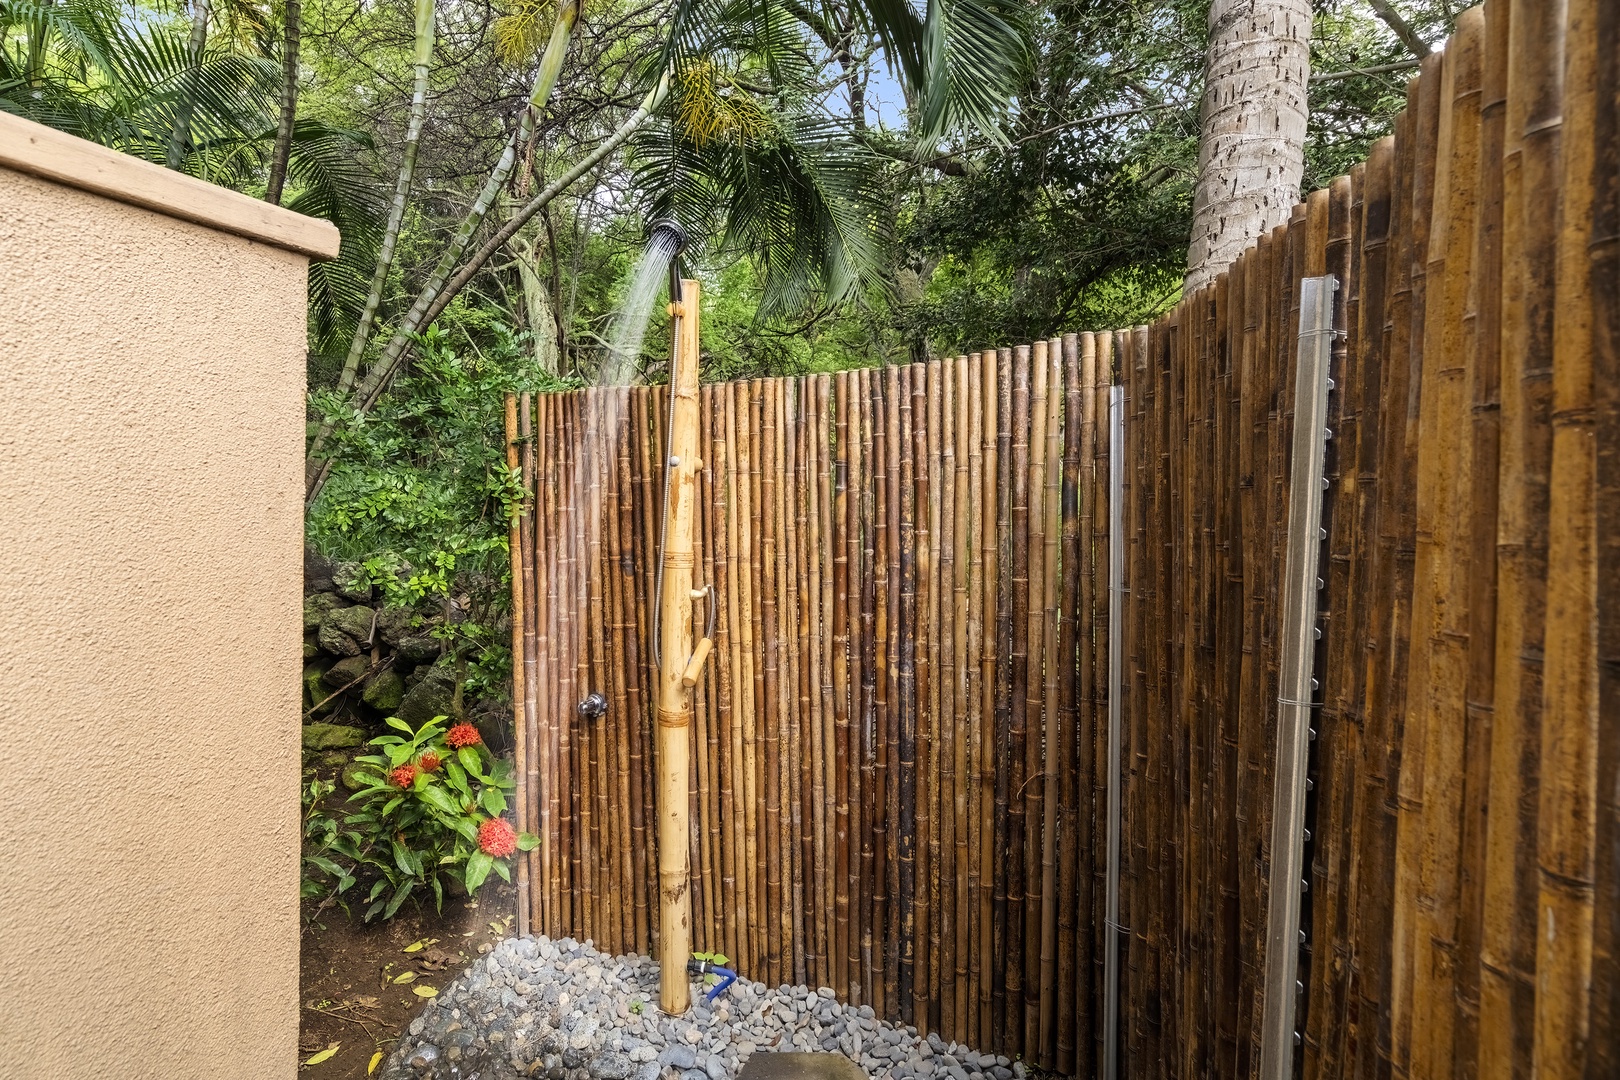 Kailua Kona Vacation Rentals, Lymans Bay Hale - Outdoor Shower to conveniently freshen up after being in the sun